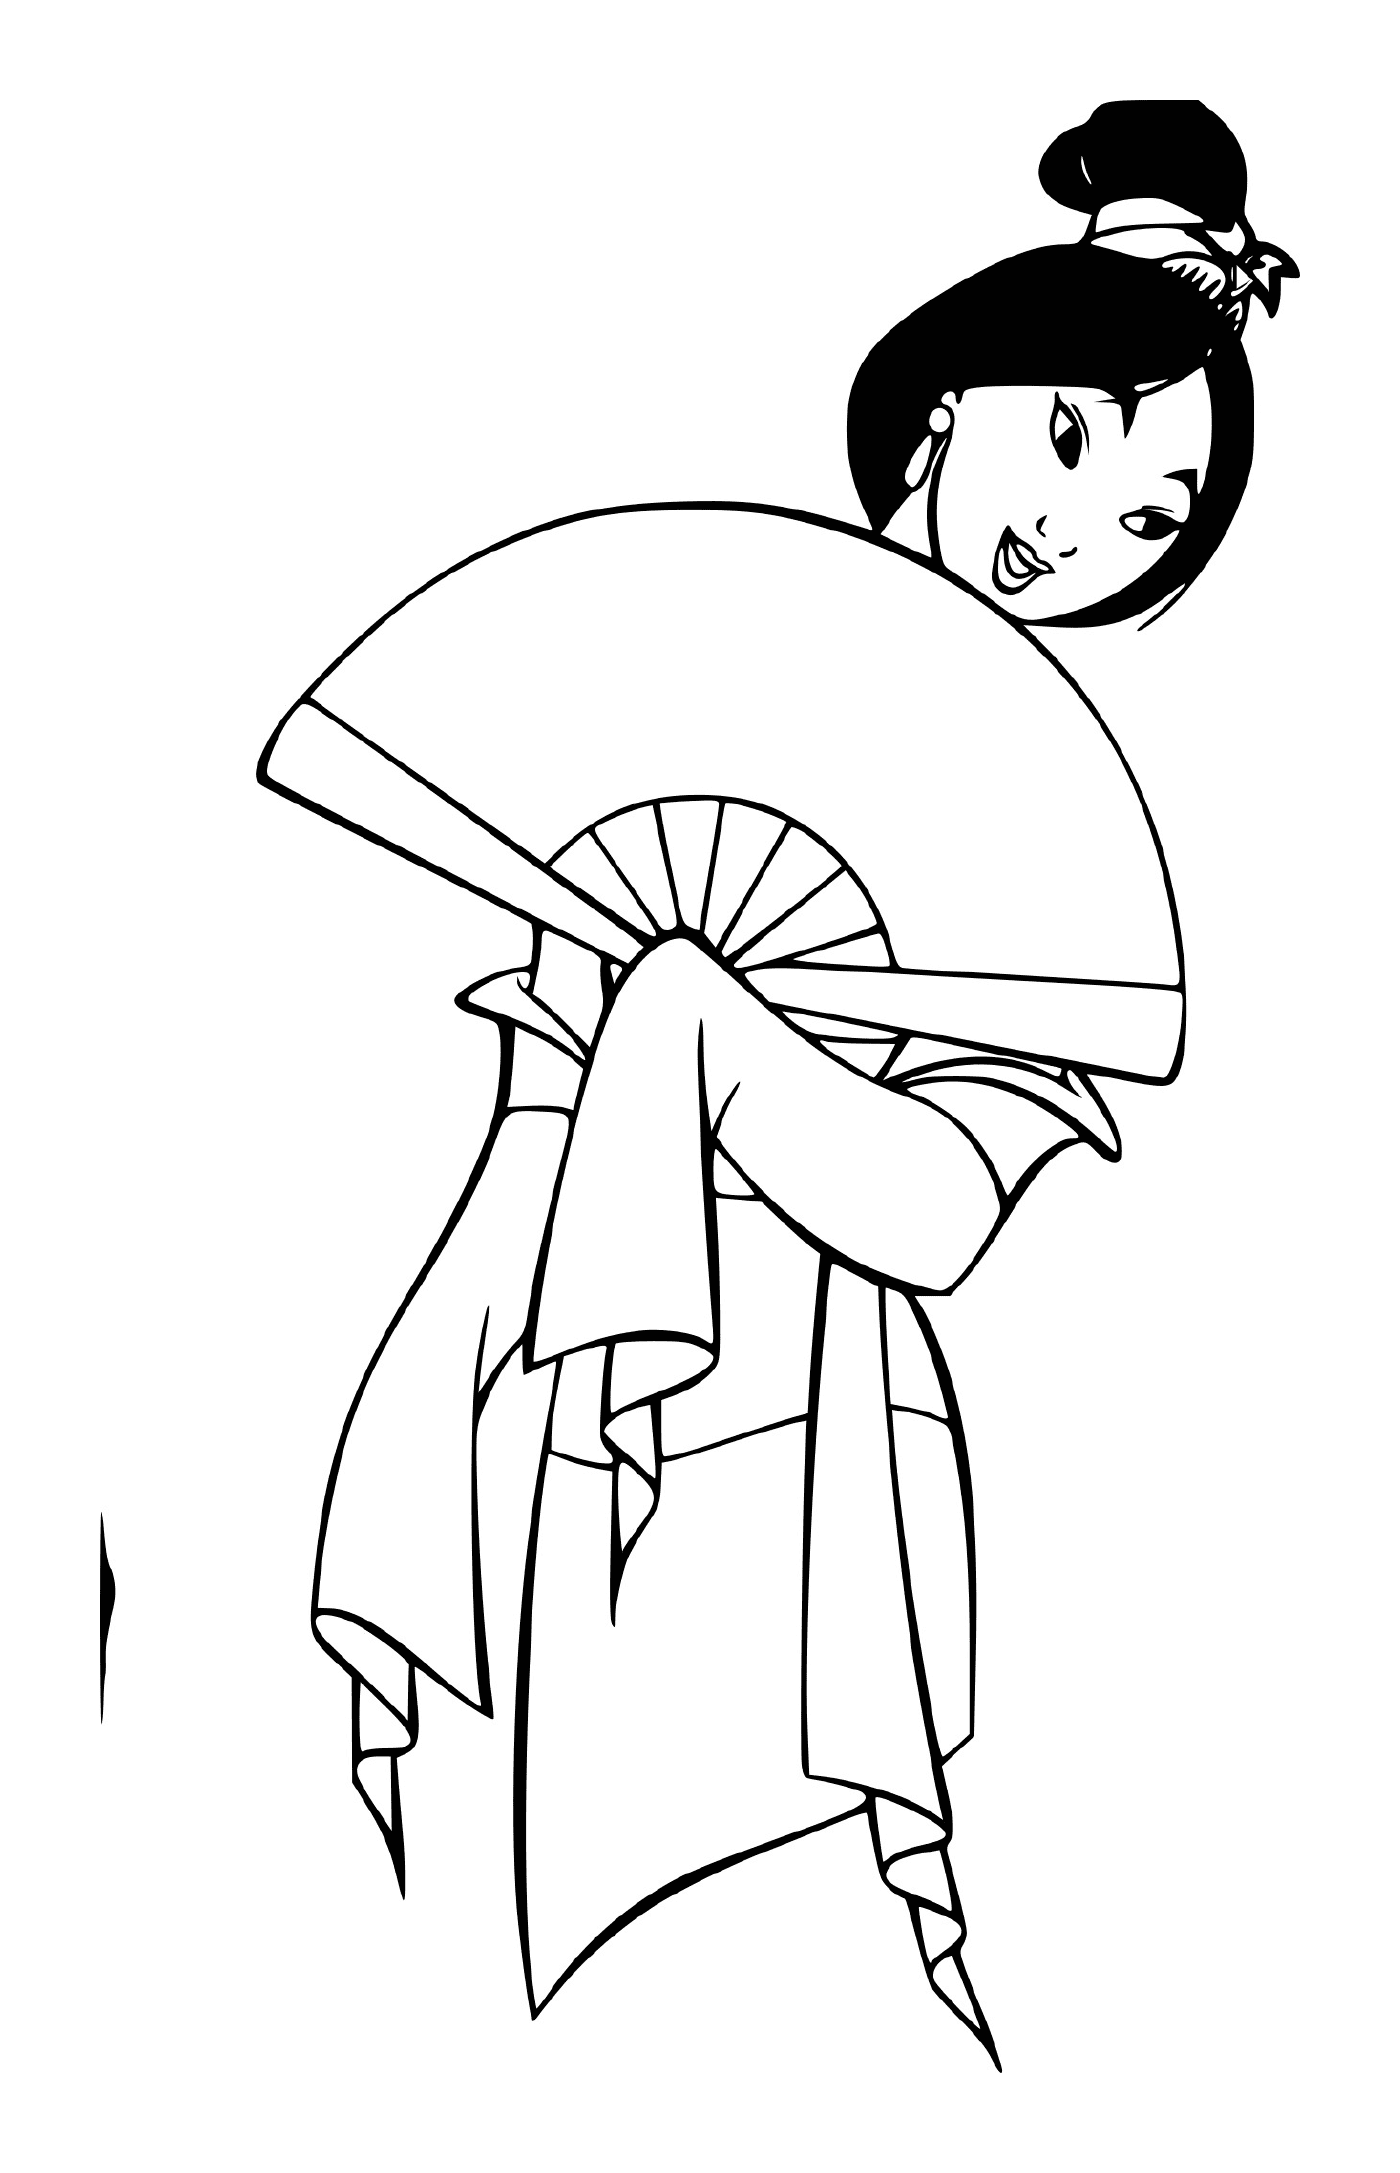  Mulan in traditional outfit 